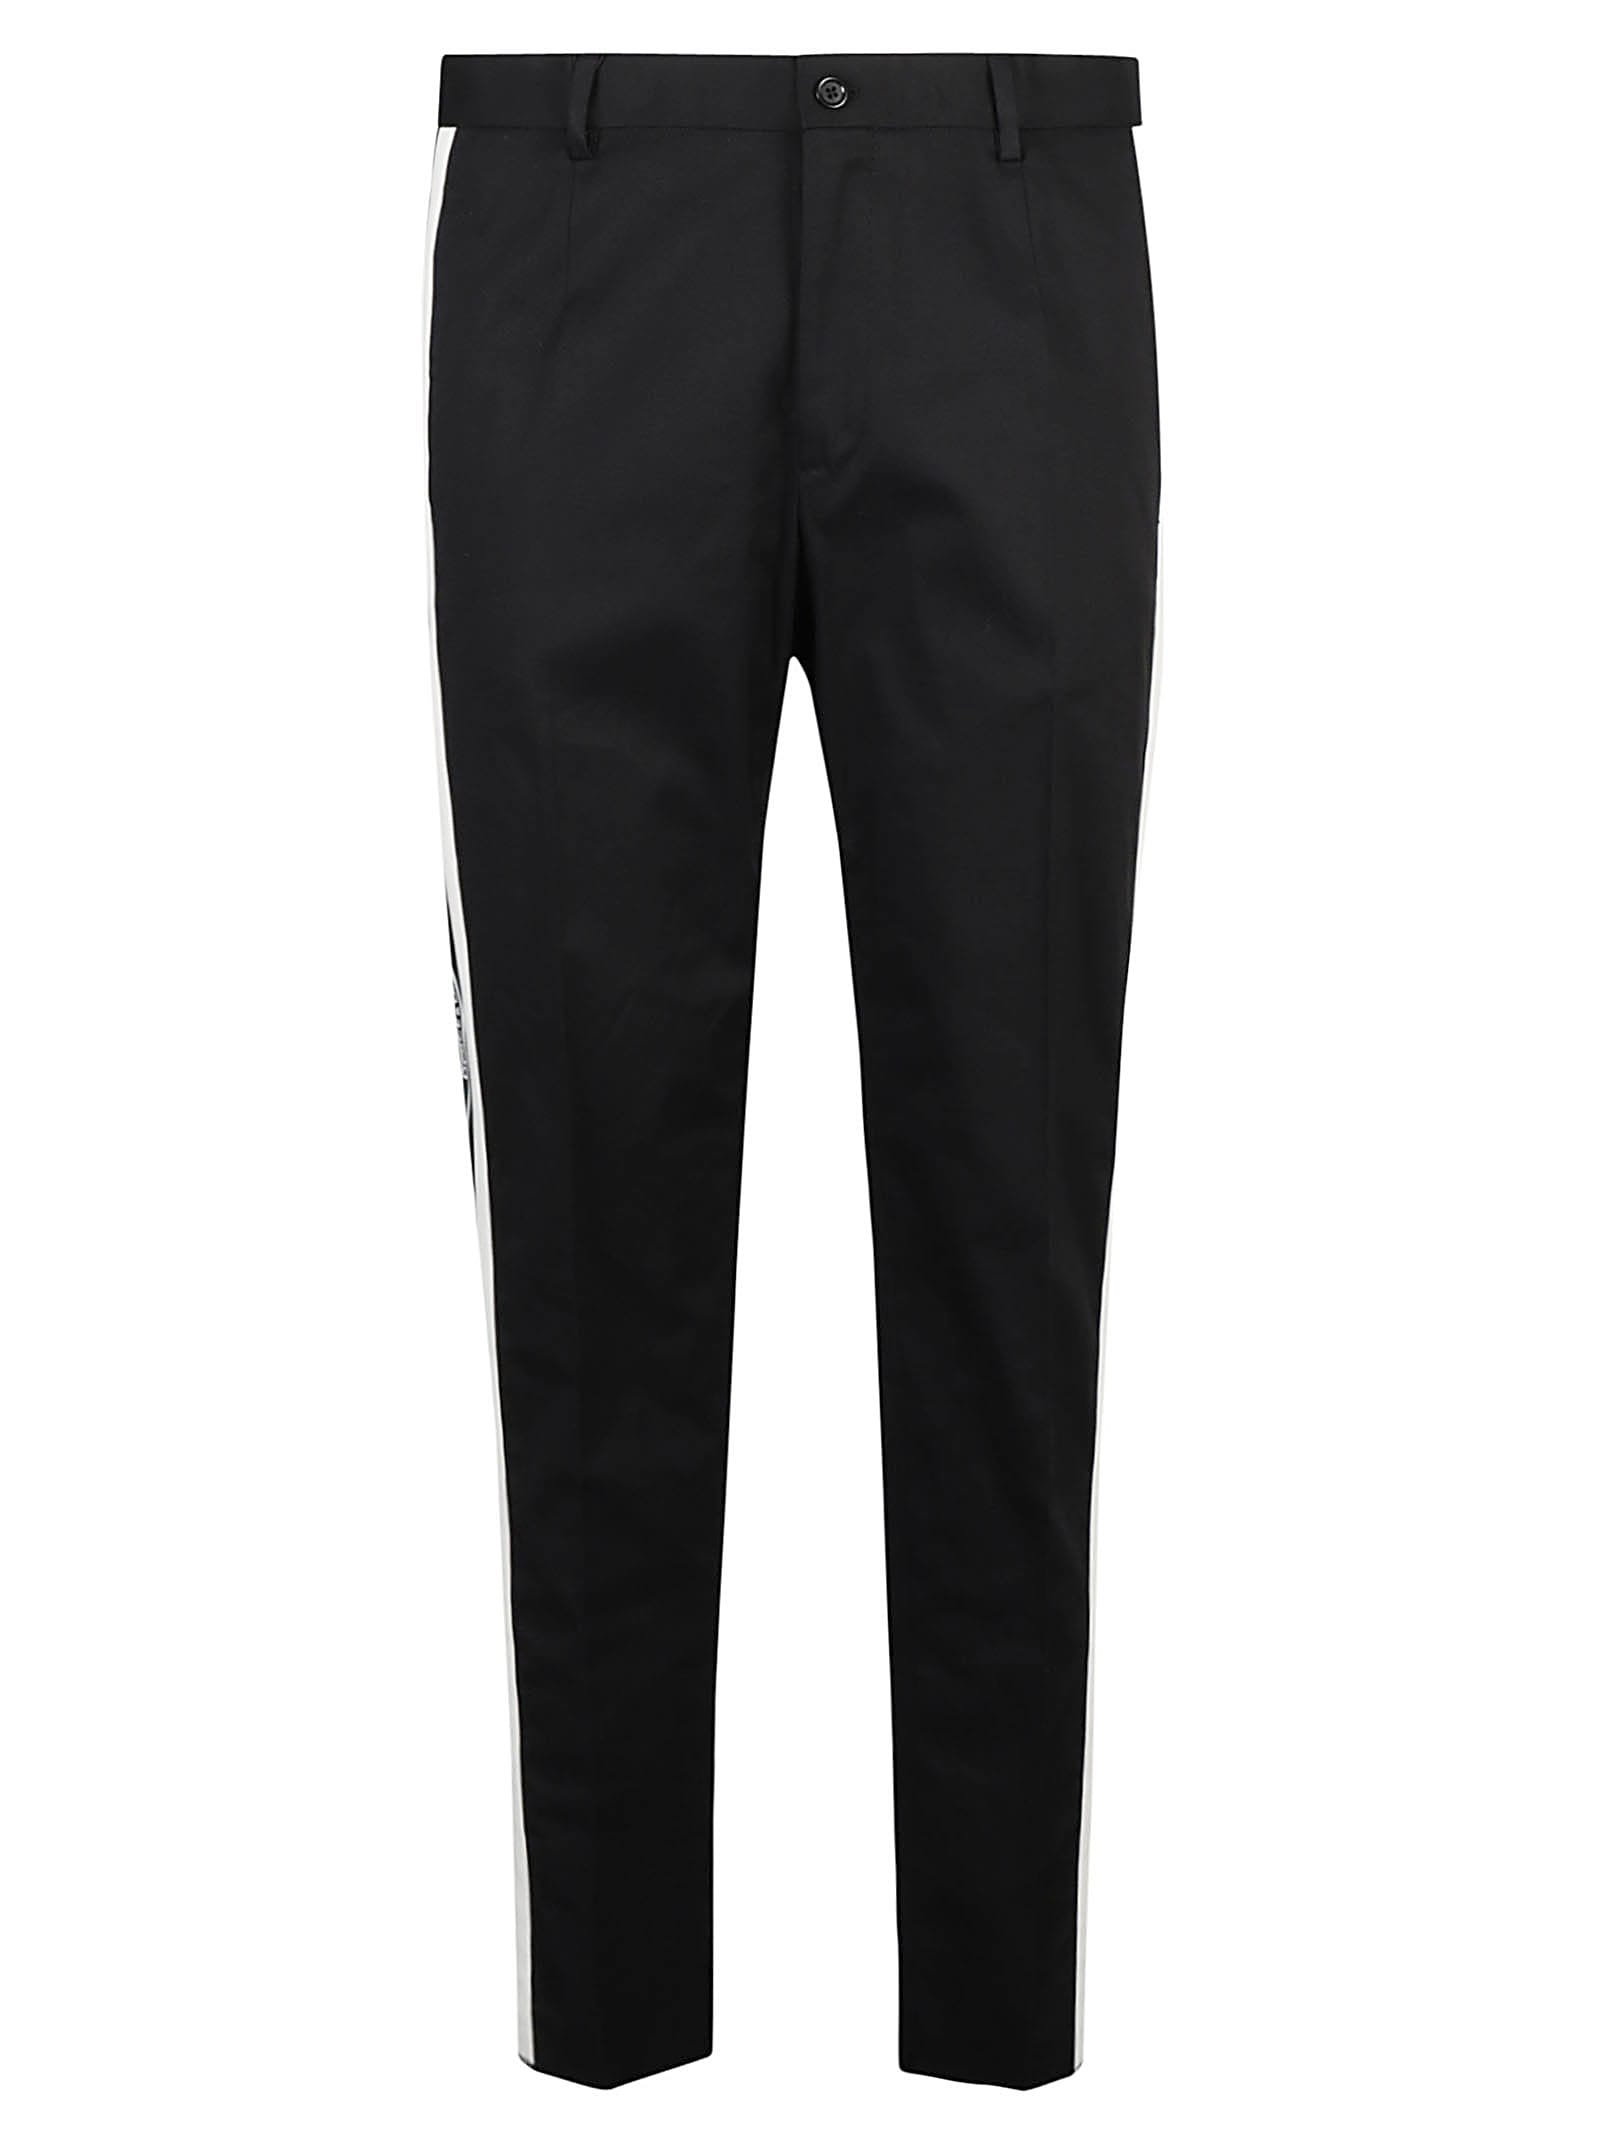 DOLCE & GABBANA SIDE STRIPED TAPERED LEG TROUSERS